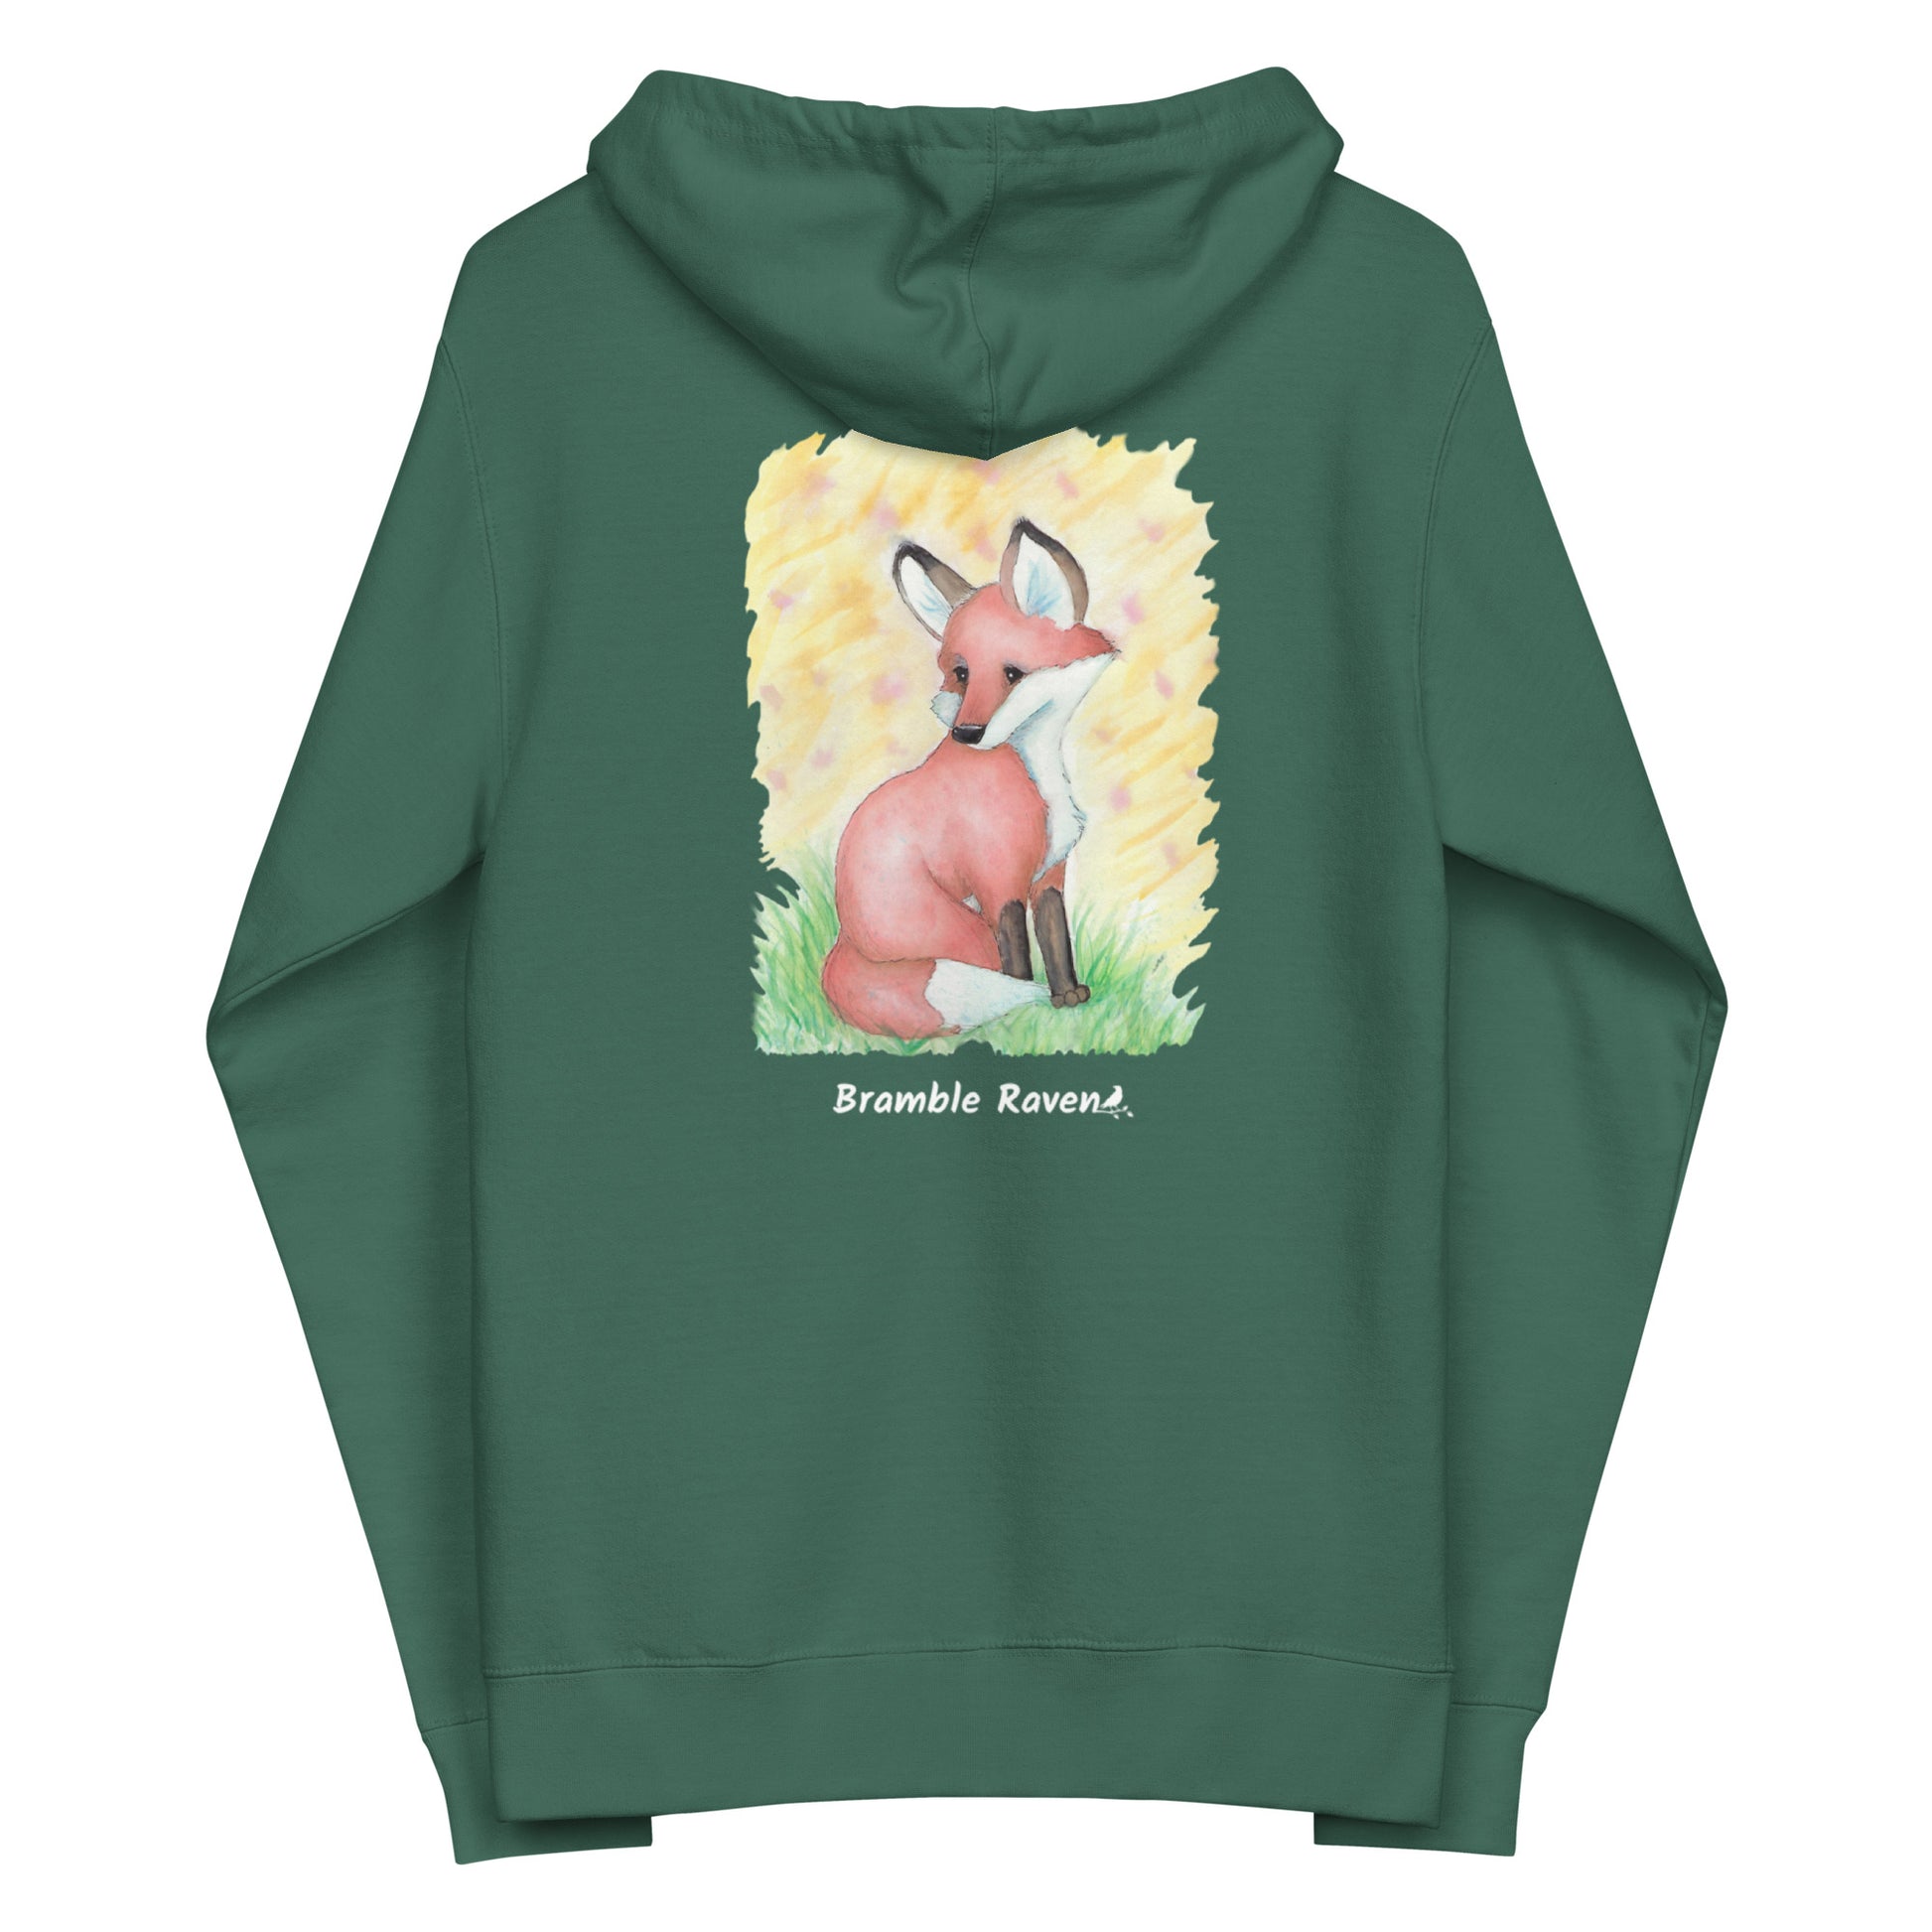 Unisex alpine green colored zip-up fleece-lined hoodie. Features original watercolor painting of a fox sitting in the grass on the back of the hoodie.